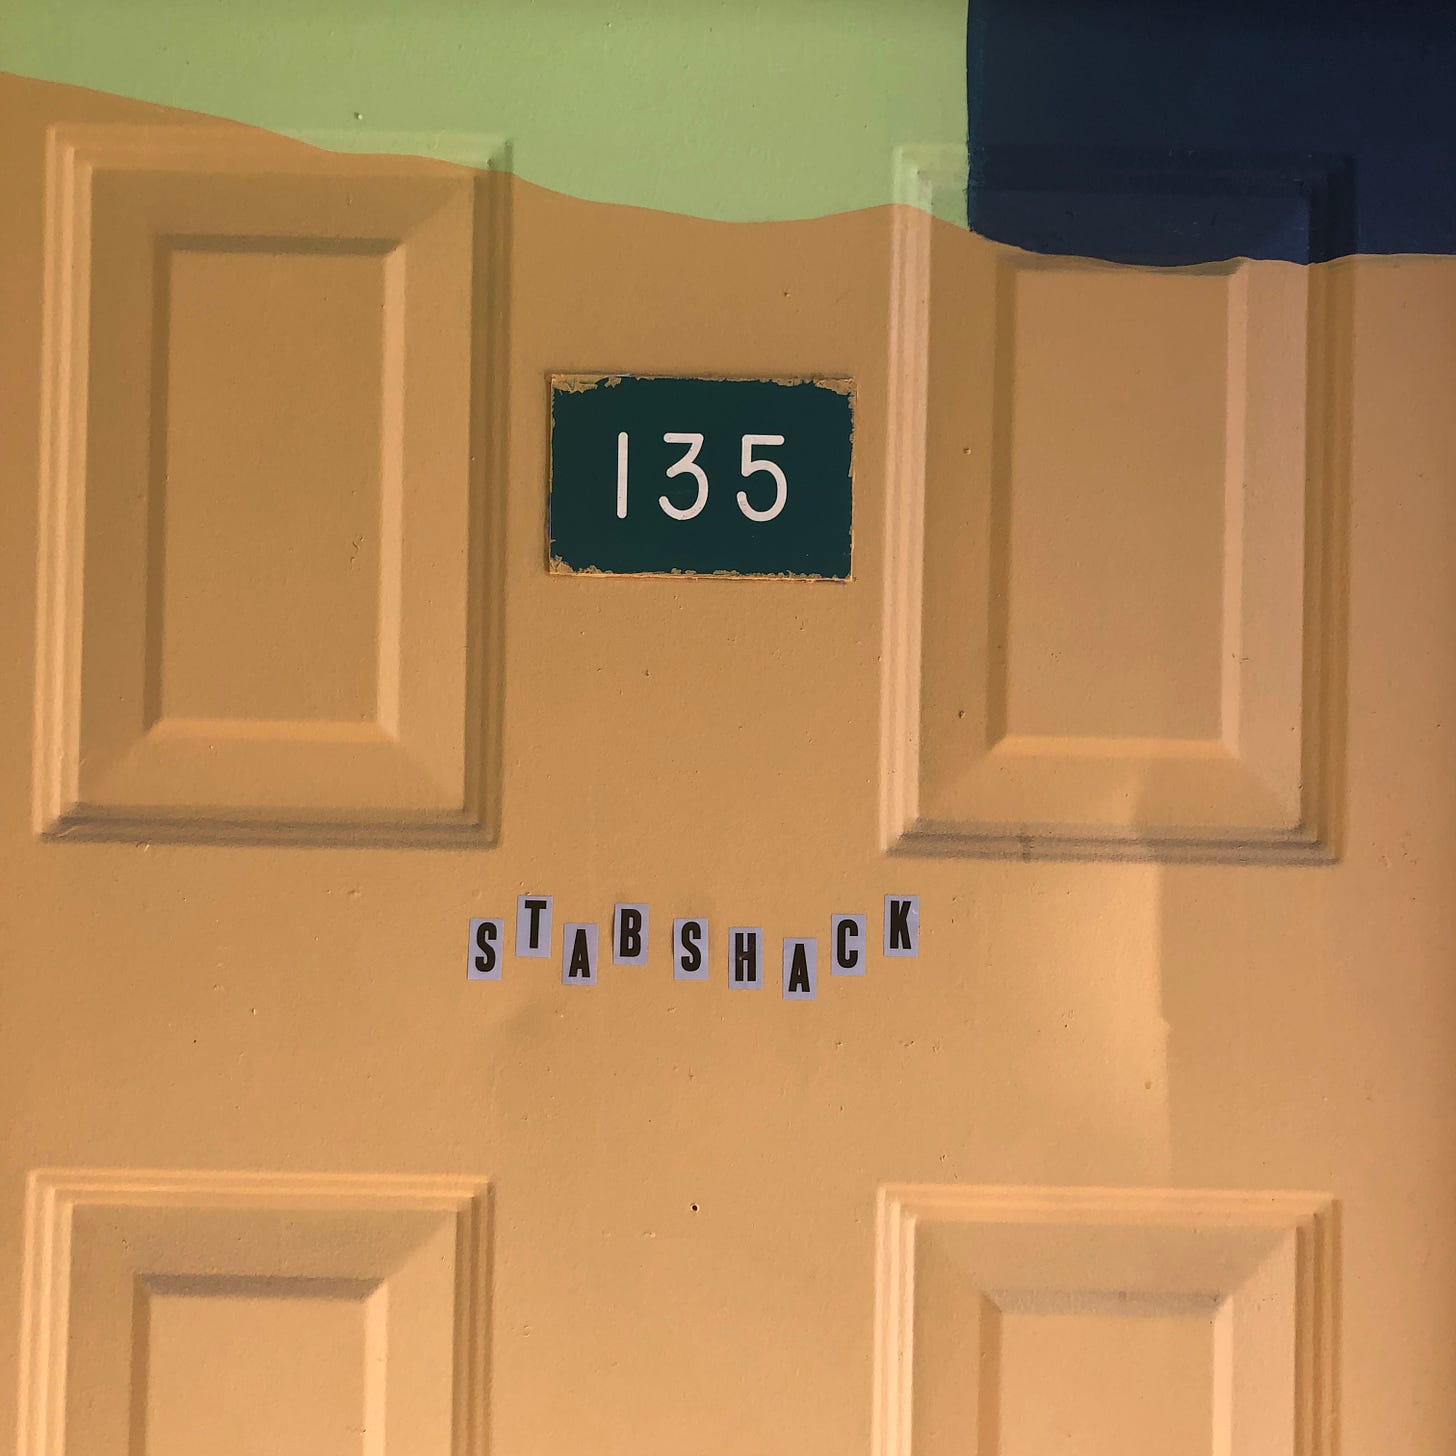 ID: yellow door with mint green and navy blue patches a white on green sign sits at the center number 135 below it in lettering the title stabshack is displayed across the door.